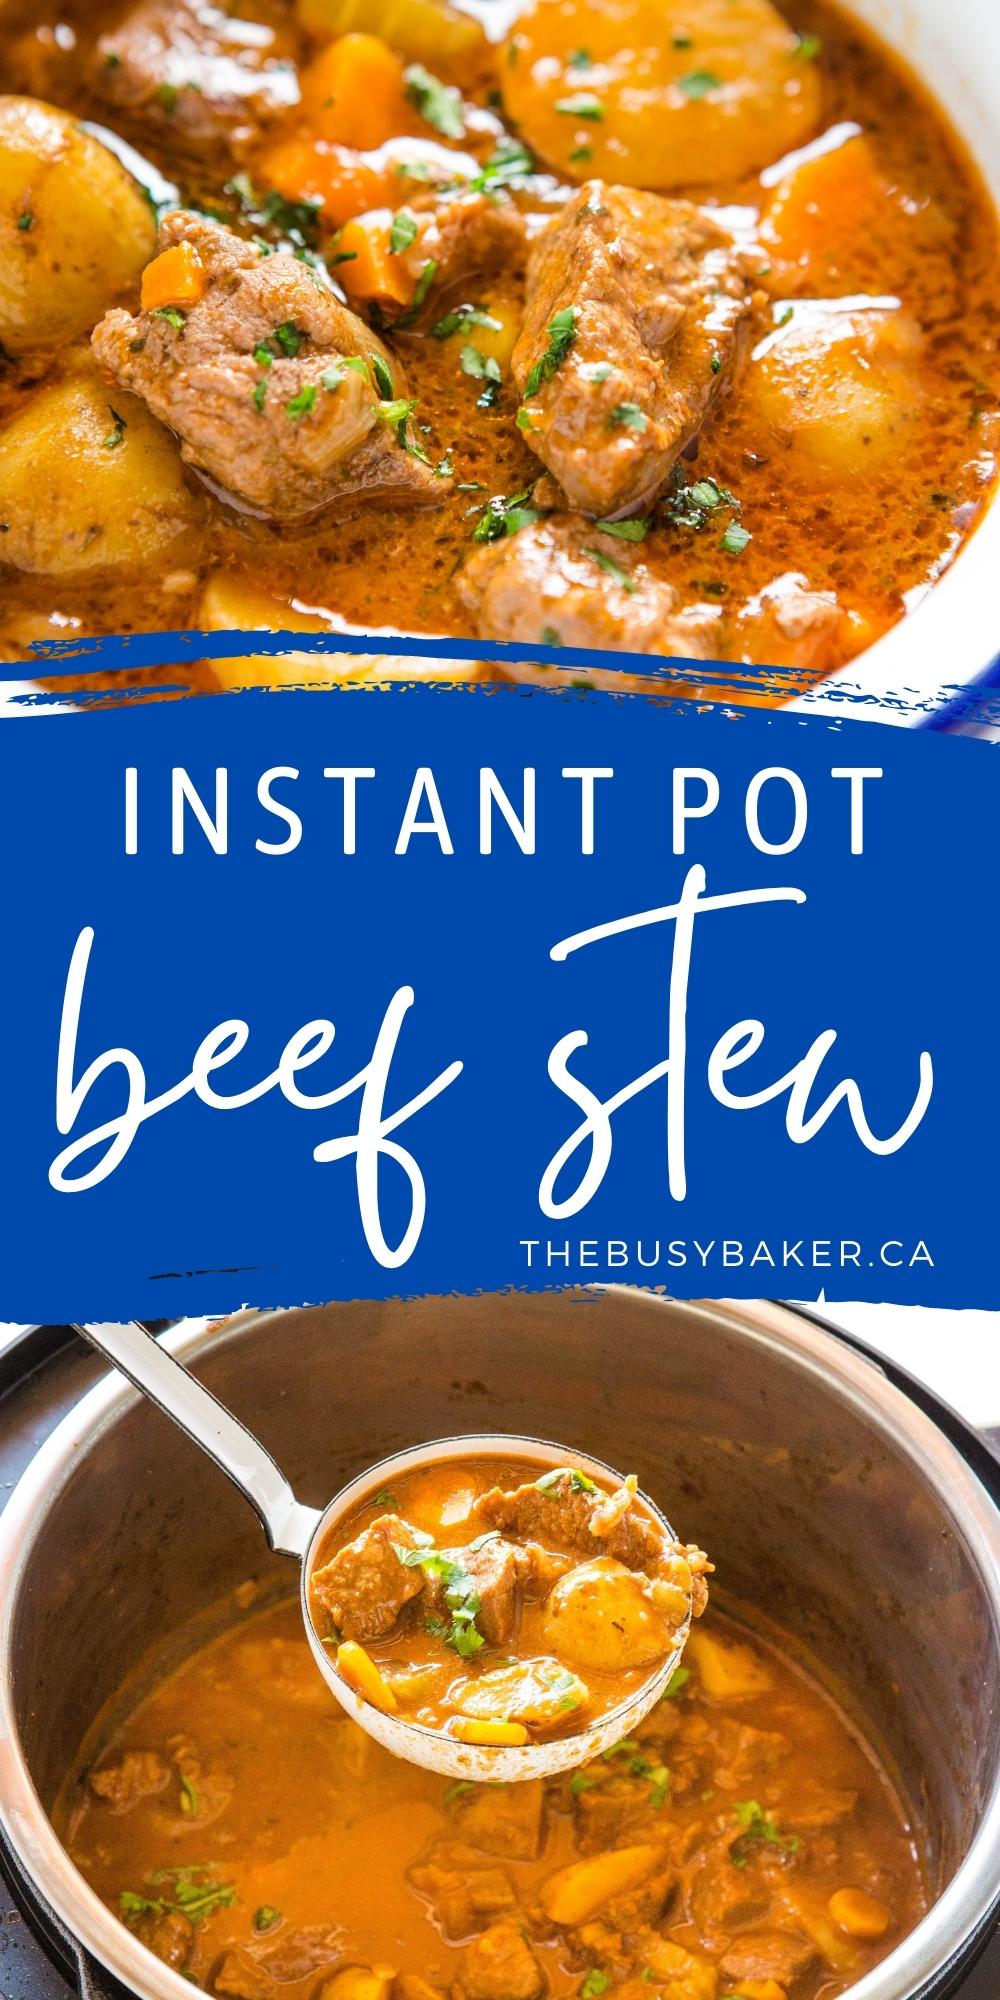 This Instant Pot Beef Stew is a deliciously easy classic beef stew recipe that's on the table in under 30 minutes. Comfort food at its finest and the perfect weeknight meal! Recipe from thebusybaker.ca! #instantpotbeefstew #instantpotdinner #familymeal #easymeal #beefstew #instantpot via @busybakerblog